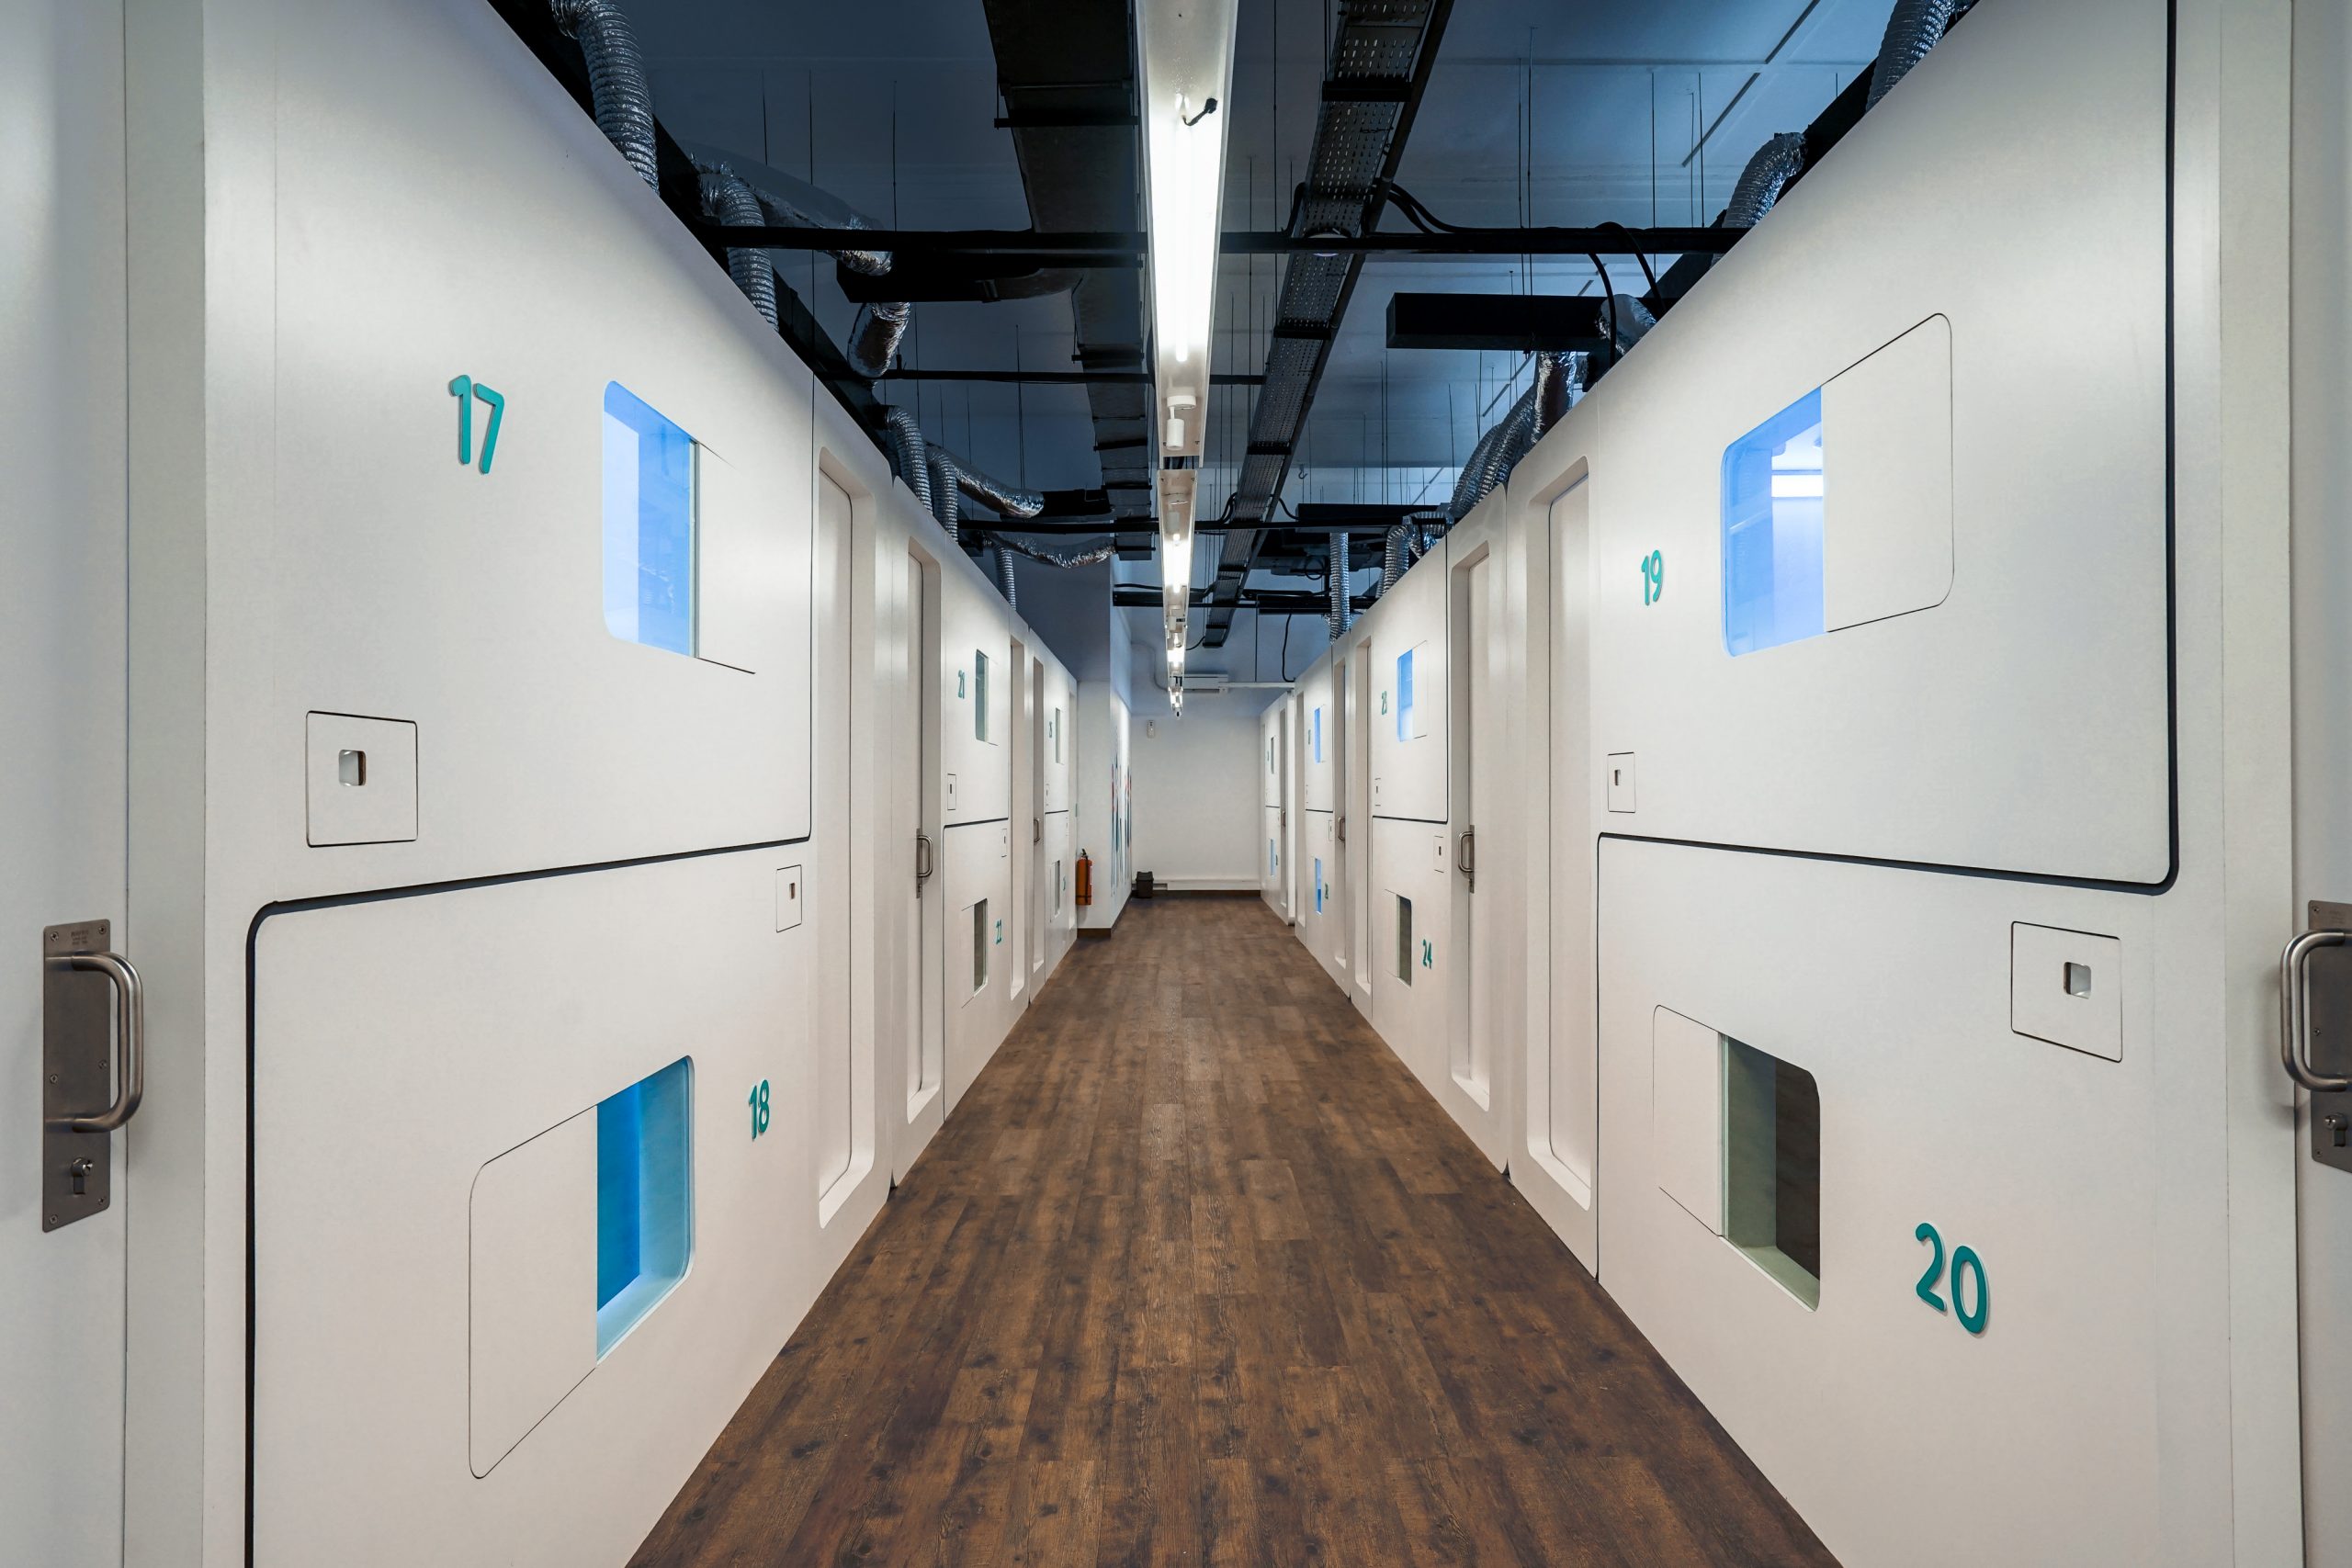 Capsule hotel startup Bobobox bags USD 11.5 million in Series A